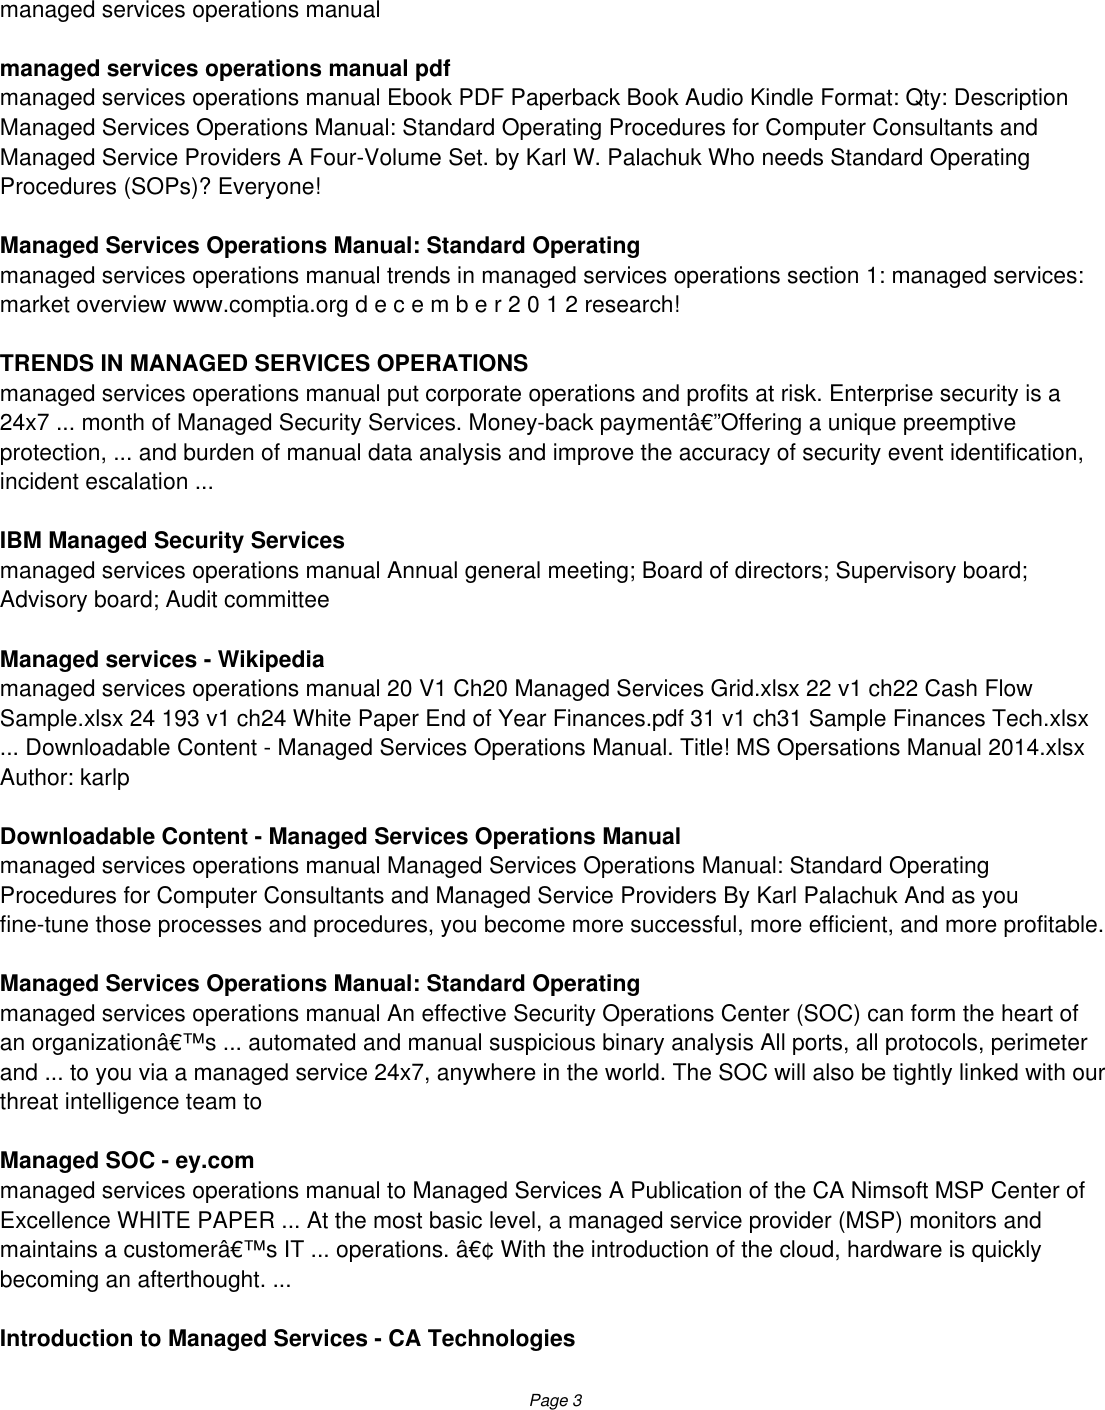 Page 3 of 9 - Managed Services Operations Manual